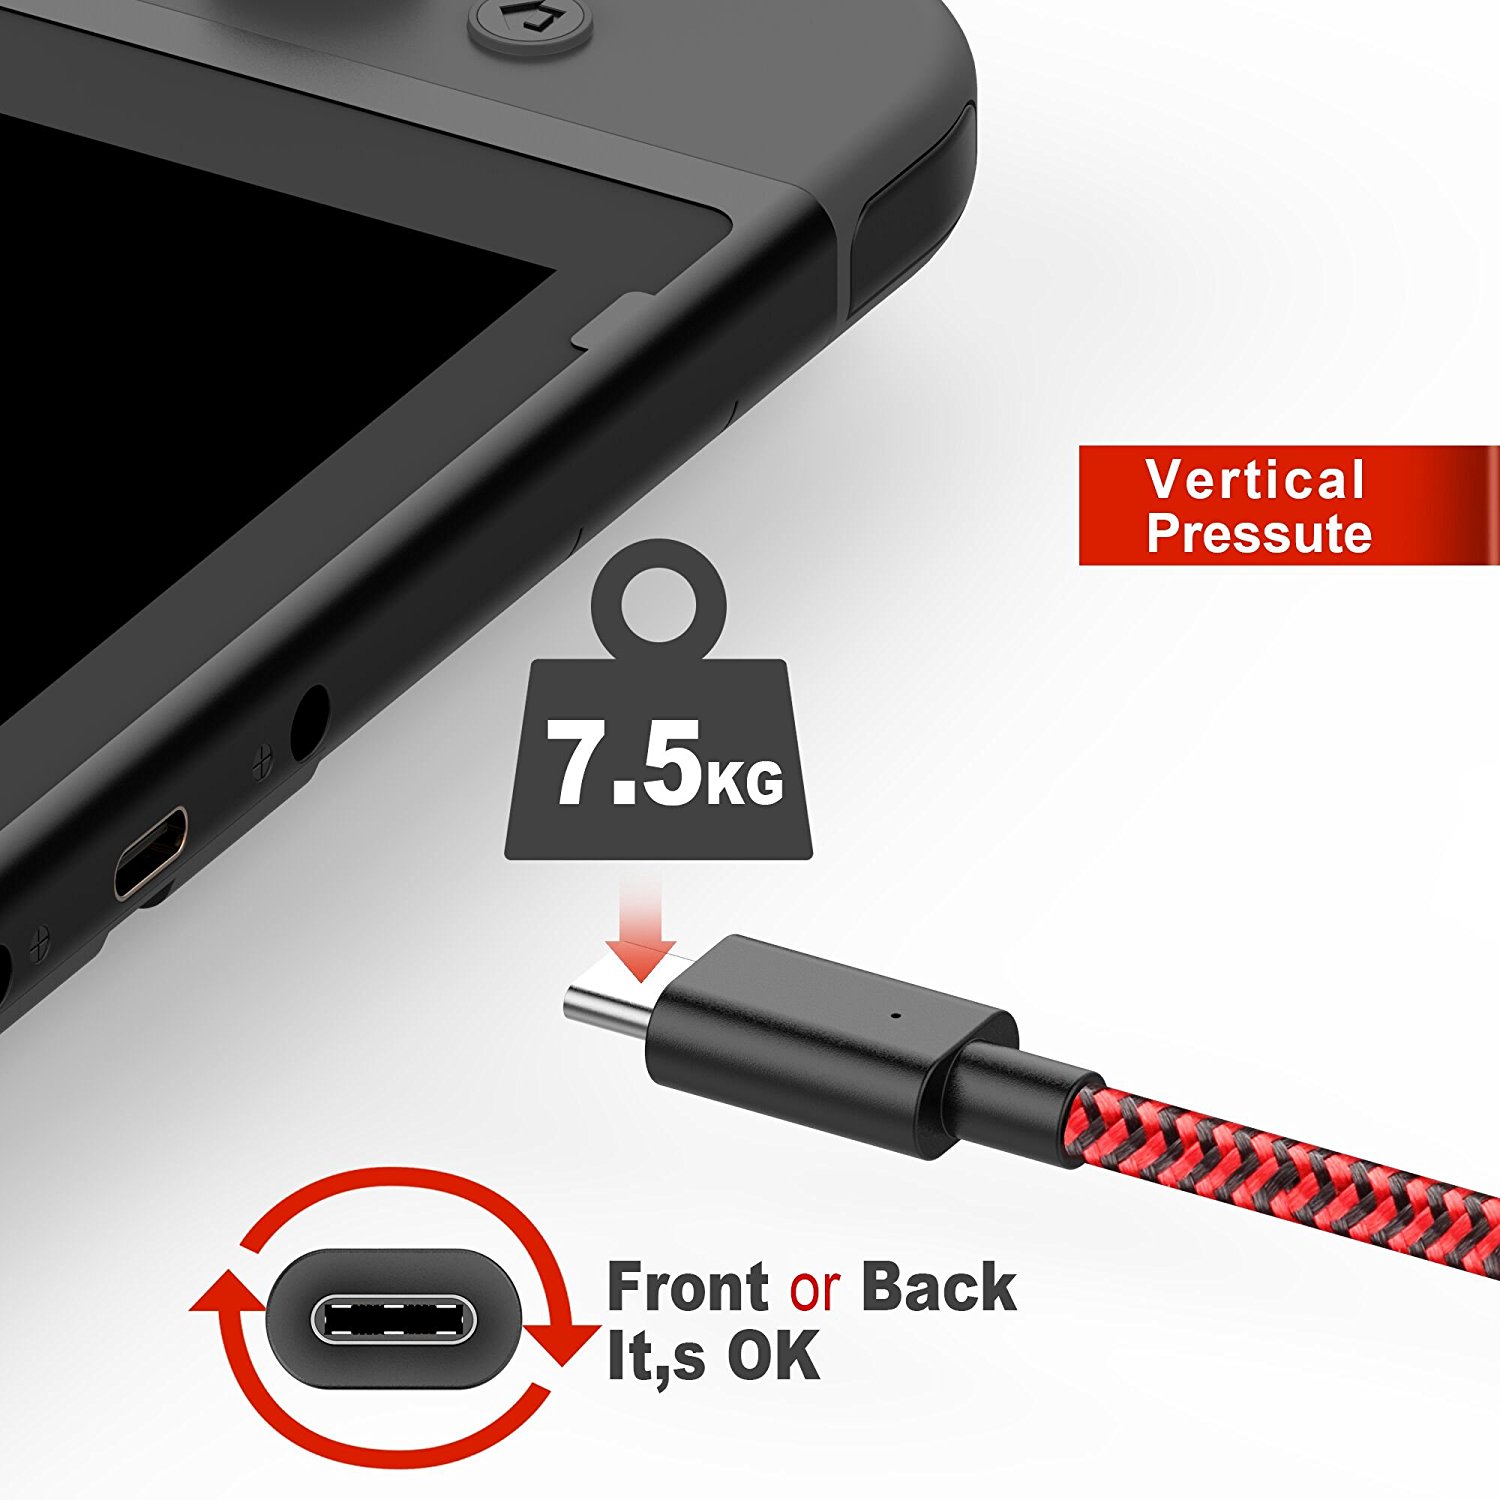 Nintendo Switch charge cable